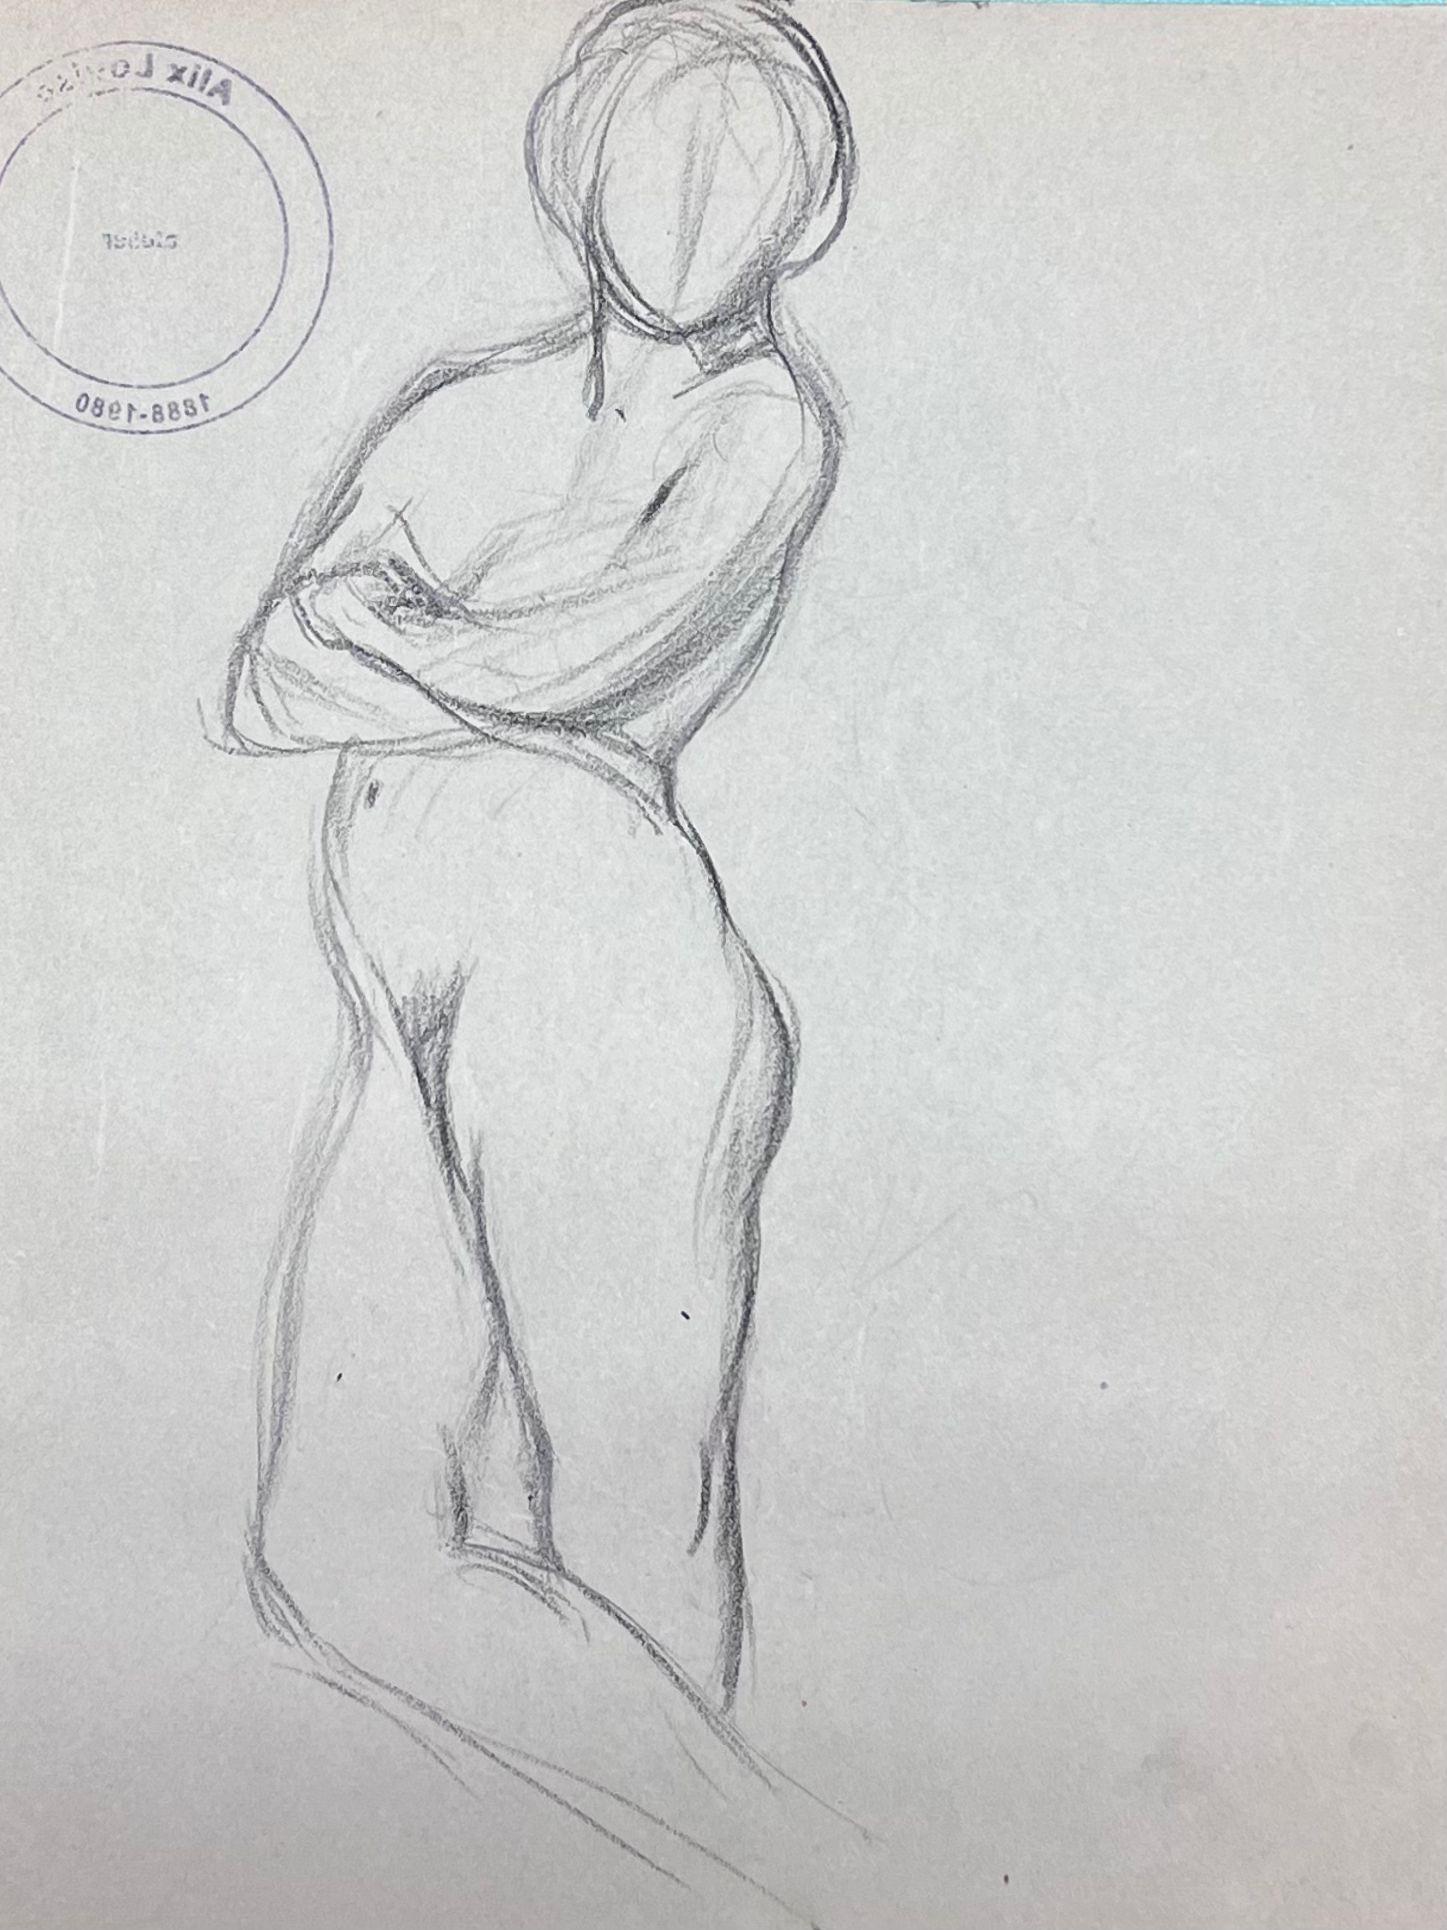 Female Nude Figure
by Louise Alix (French, 1888-1980) *see notes below
provenance stamp to the back 
pencil drawing on artist paper, unframed
measures: 10 high by 8 inches wide
condition: overall very good and sound, a few scuffs and marks to the